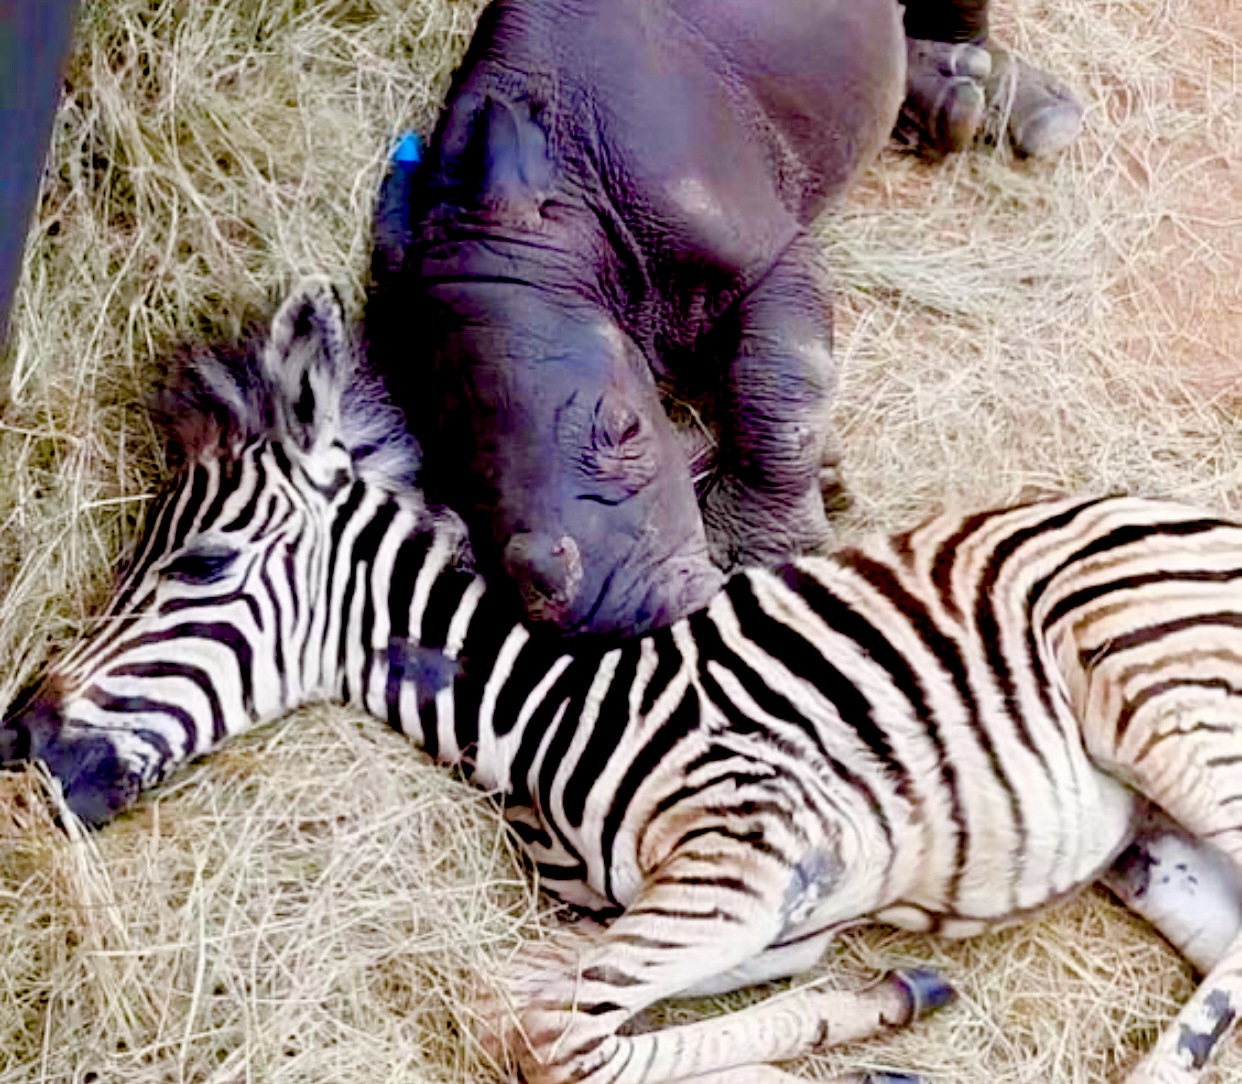 Baby Zebra, Rhino, Keith Middlebrook, Keith Middlebrook Foundation, NBA, NFL, MLB, Taylor Swift, Save the Animals, Charity, Health, All Furry souls Matter